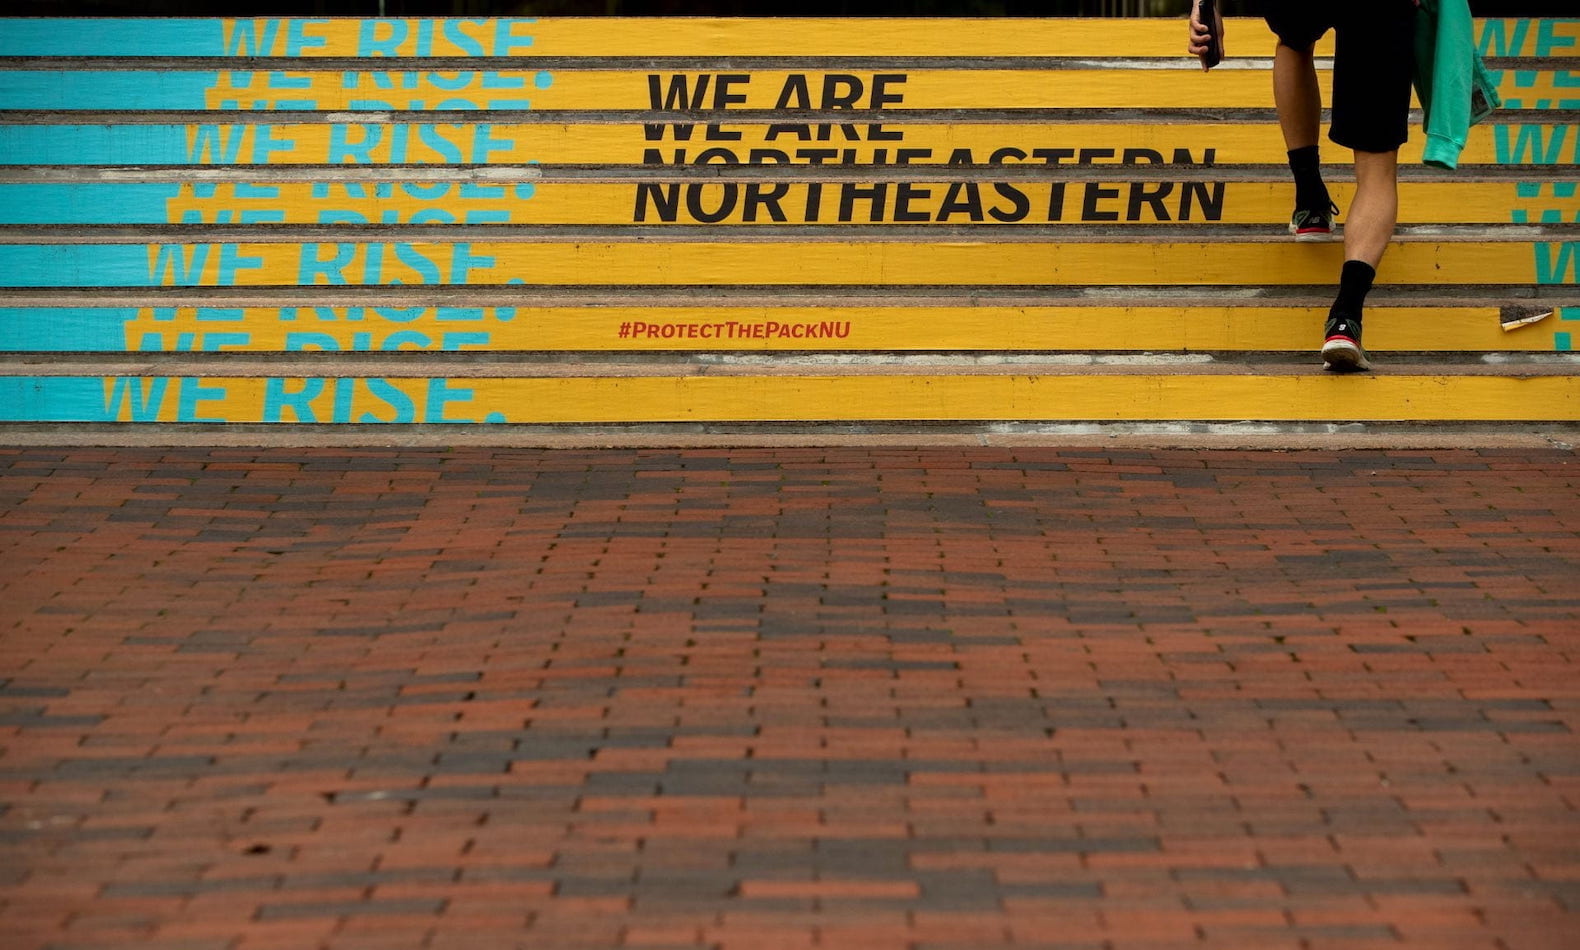 Steps on the Northeastern campus with text: "Rise. We are Northeastern."